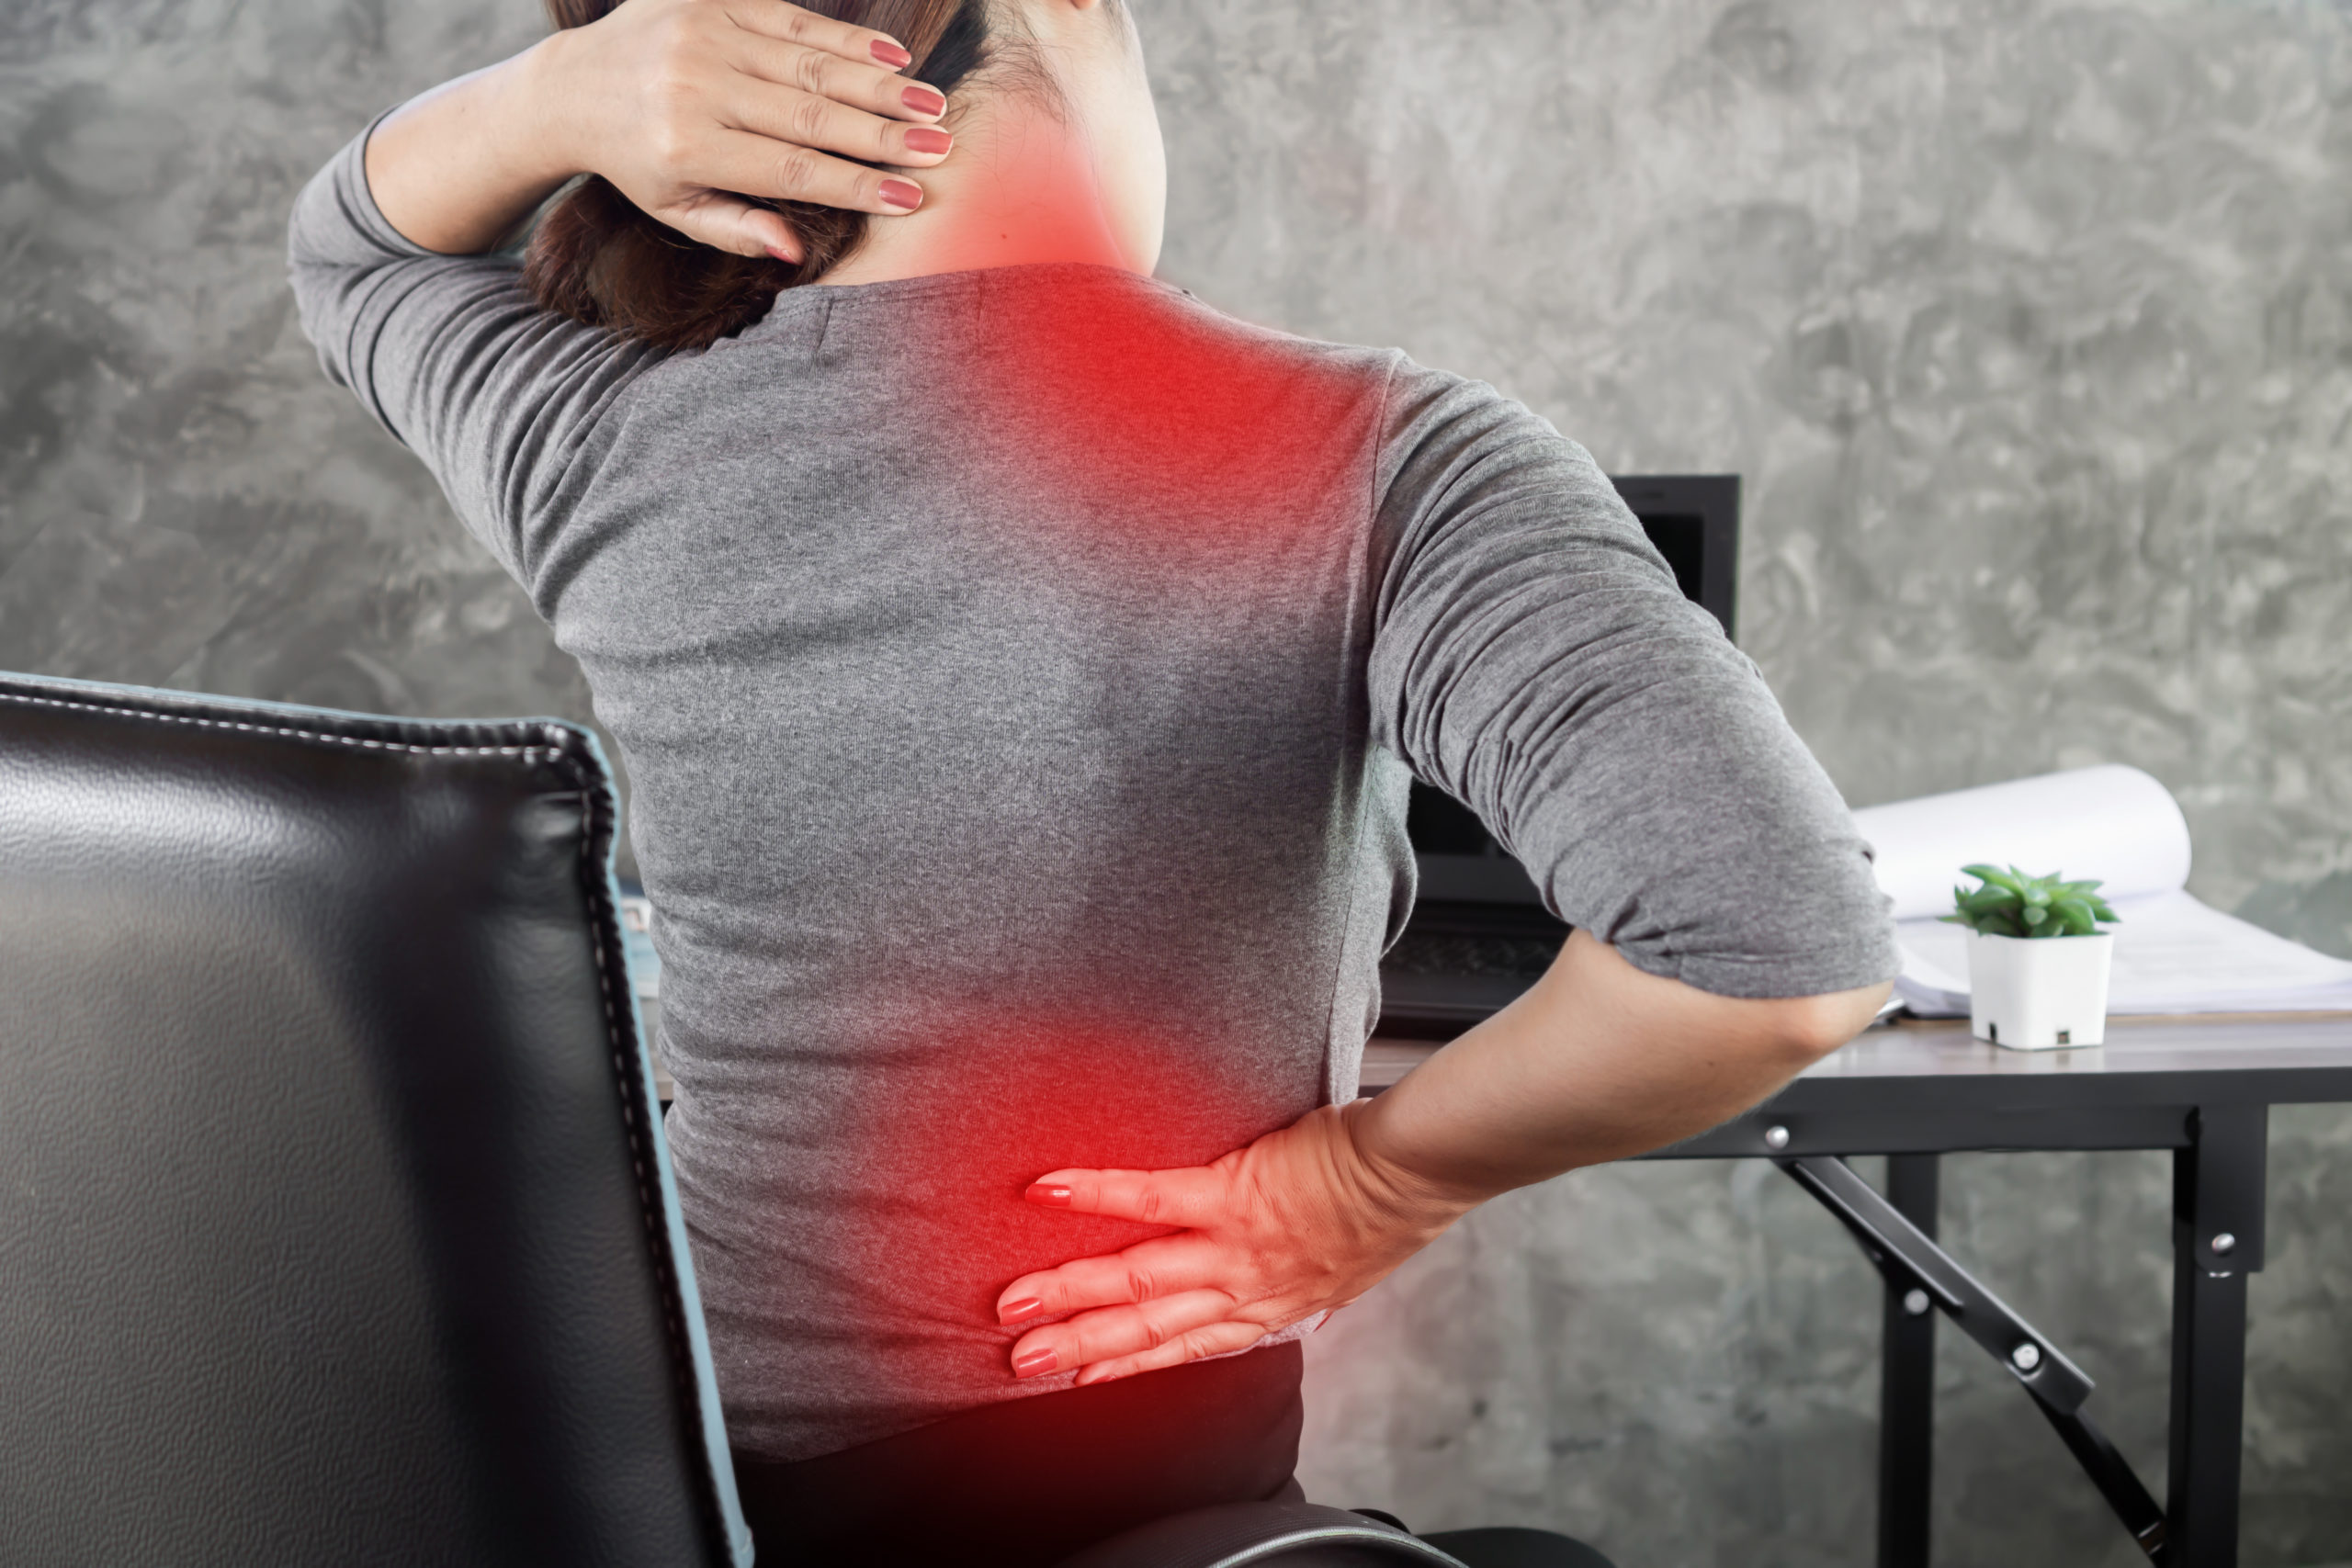  suffering from office syndrome having lower back pain, neck and shoulder pain sitting on chair